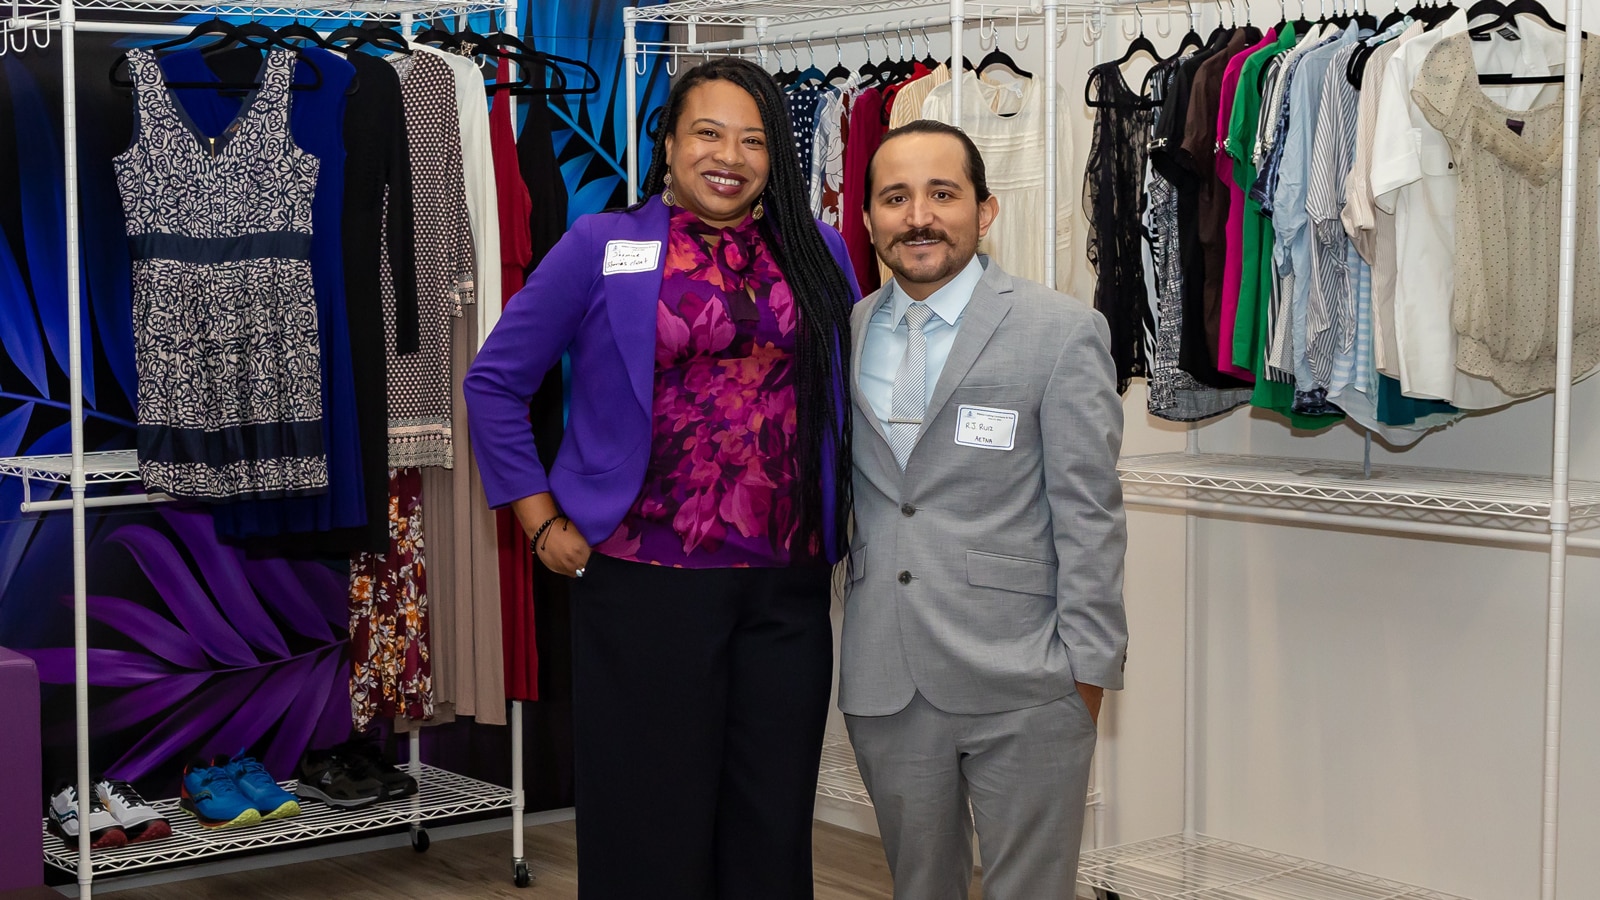 Shamine Linton, Founder and President of Sharia’s Closet and Robert J. Ruiz, Director of Health Care Quality Management, Aetna Better Health of California standing in a closet full of clothing.